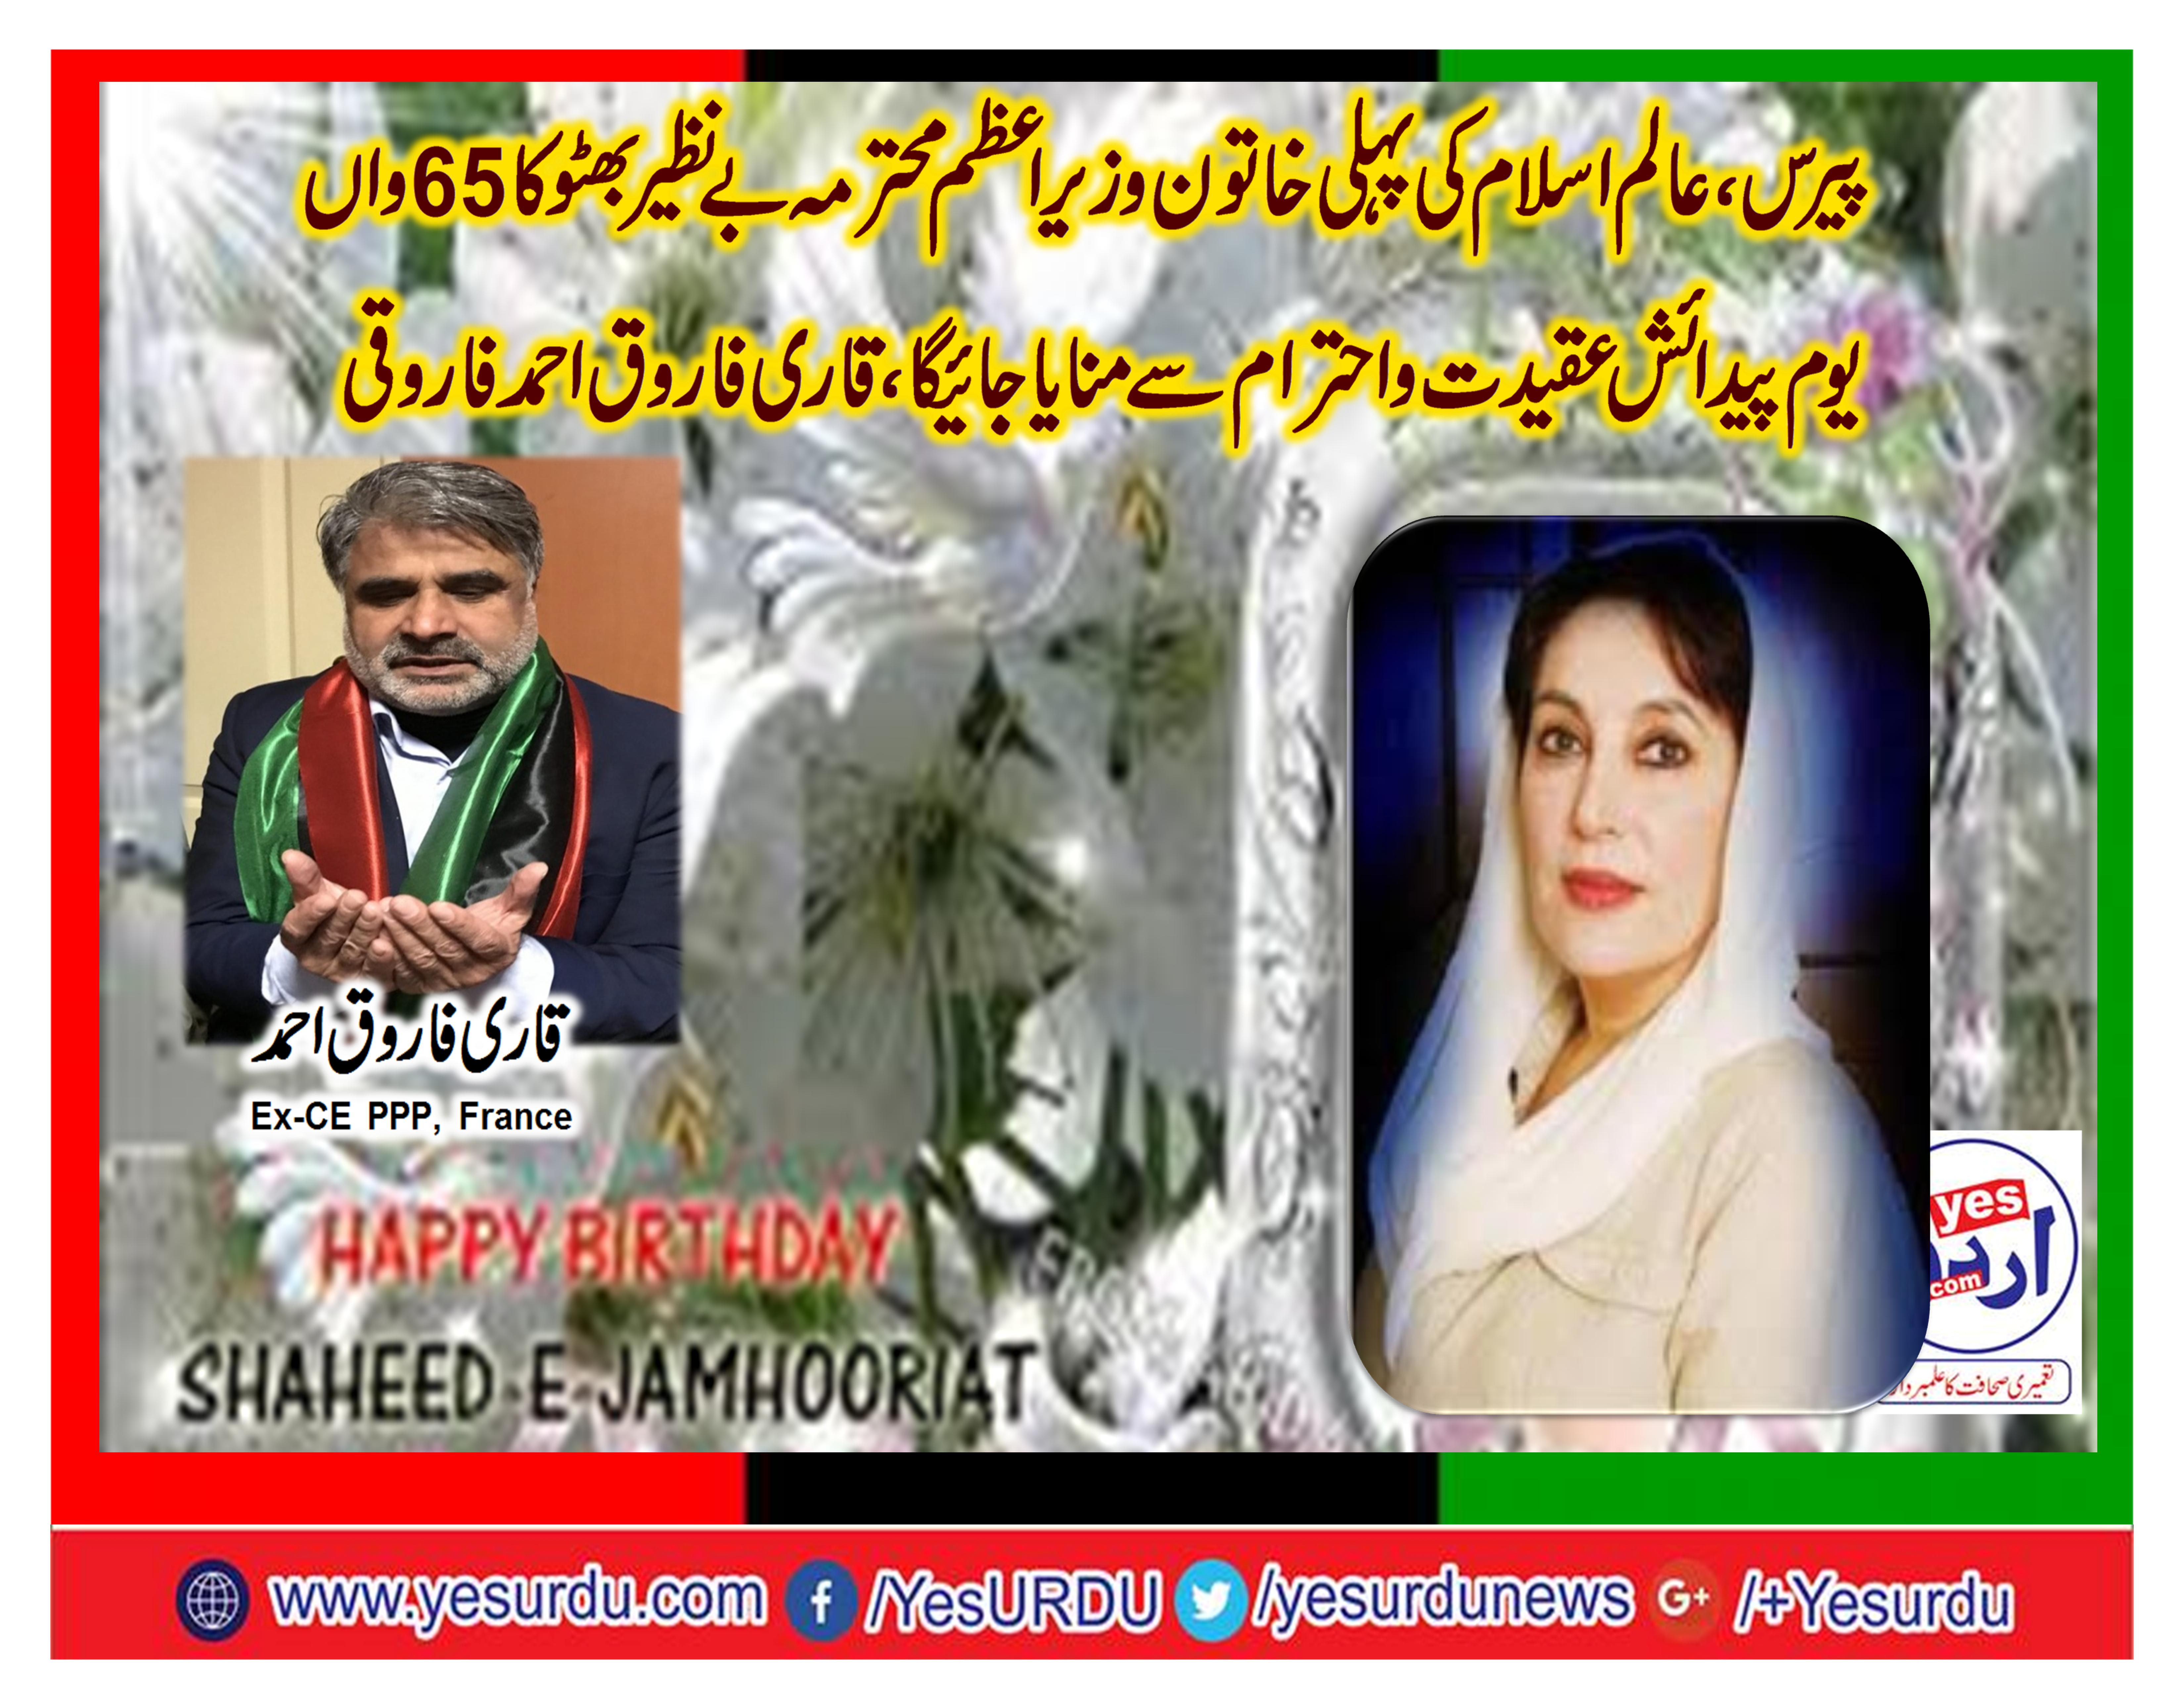 QARI FAROOQ AHMED, FAROOQI, EX-CHIEF, ORGANIZER, PPP, EUROPE, PAID, TRIBUTE, TO, MOHTARMA, BE NAZIR, BHUTTO, ON, HER, 65TH, BIRTHDAY